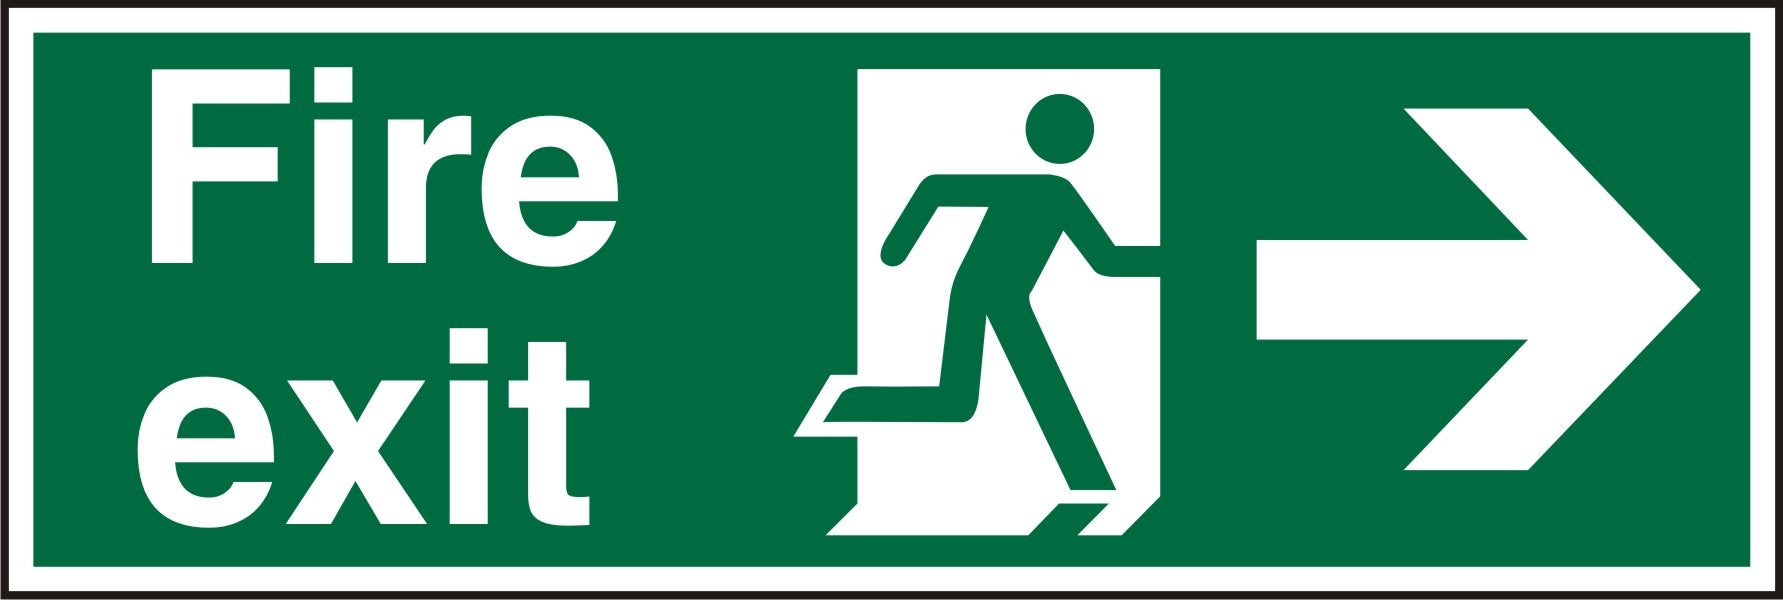 Best Value Seco Fire Exit - Fire Exit, Man Running Right, Arrow Pointing Right Sign, 450mm x 150mm - Self Adhesive Vinyl